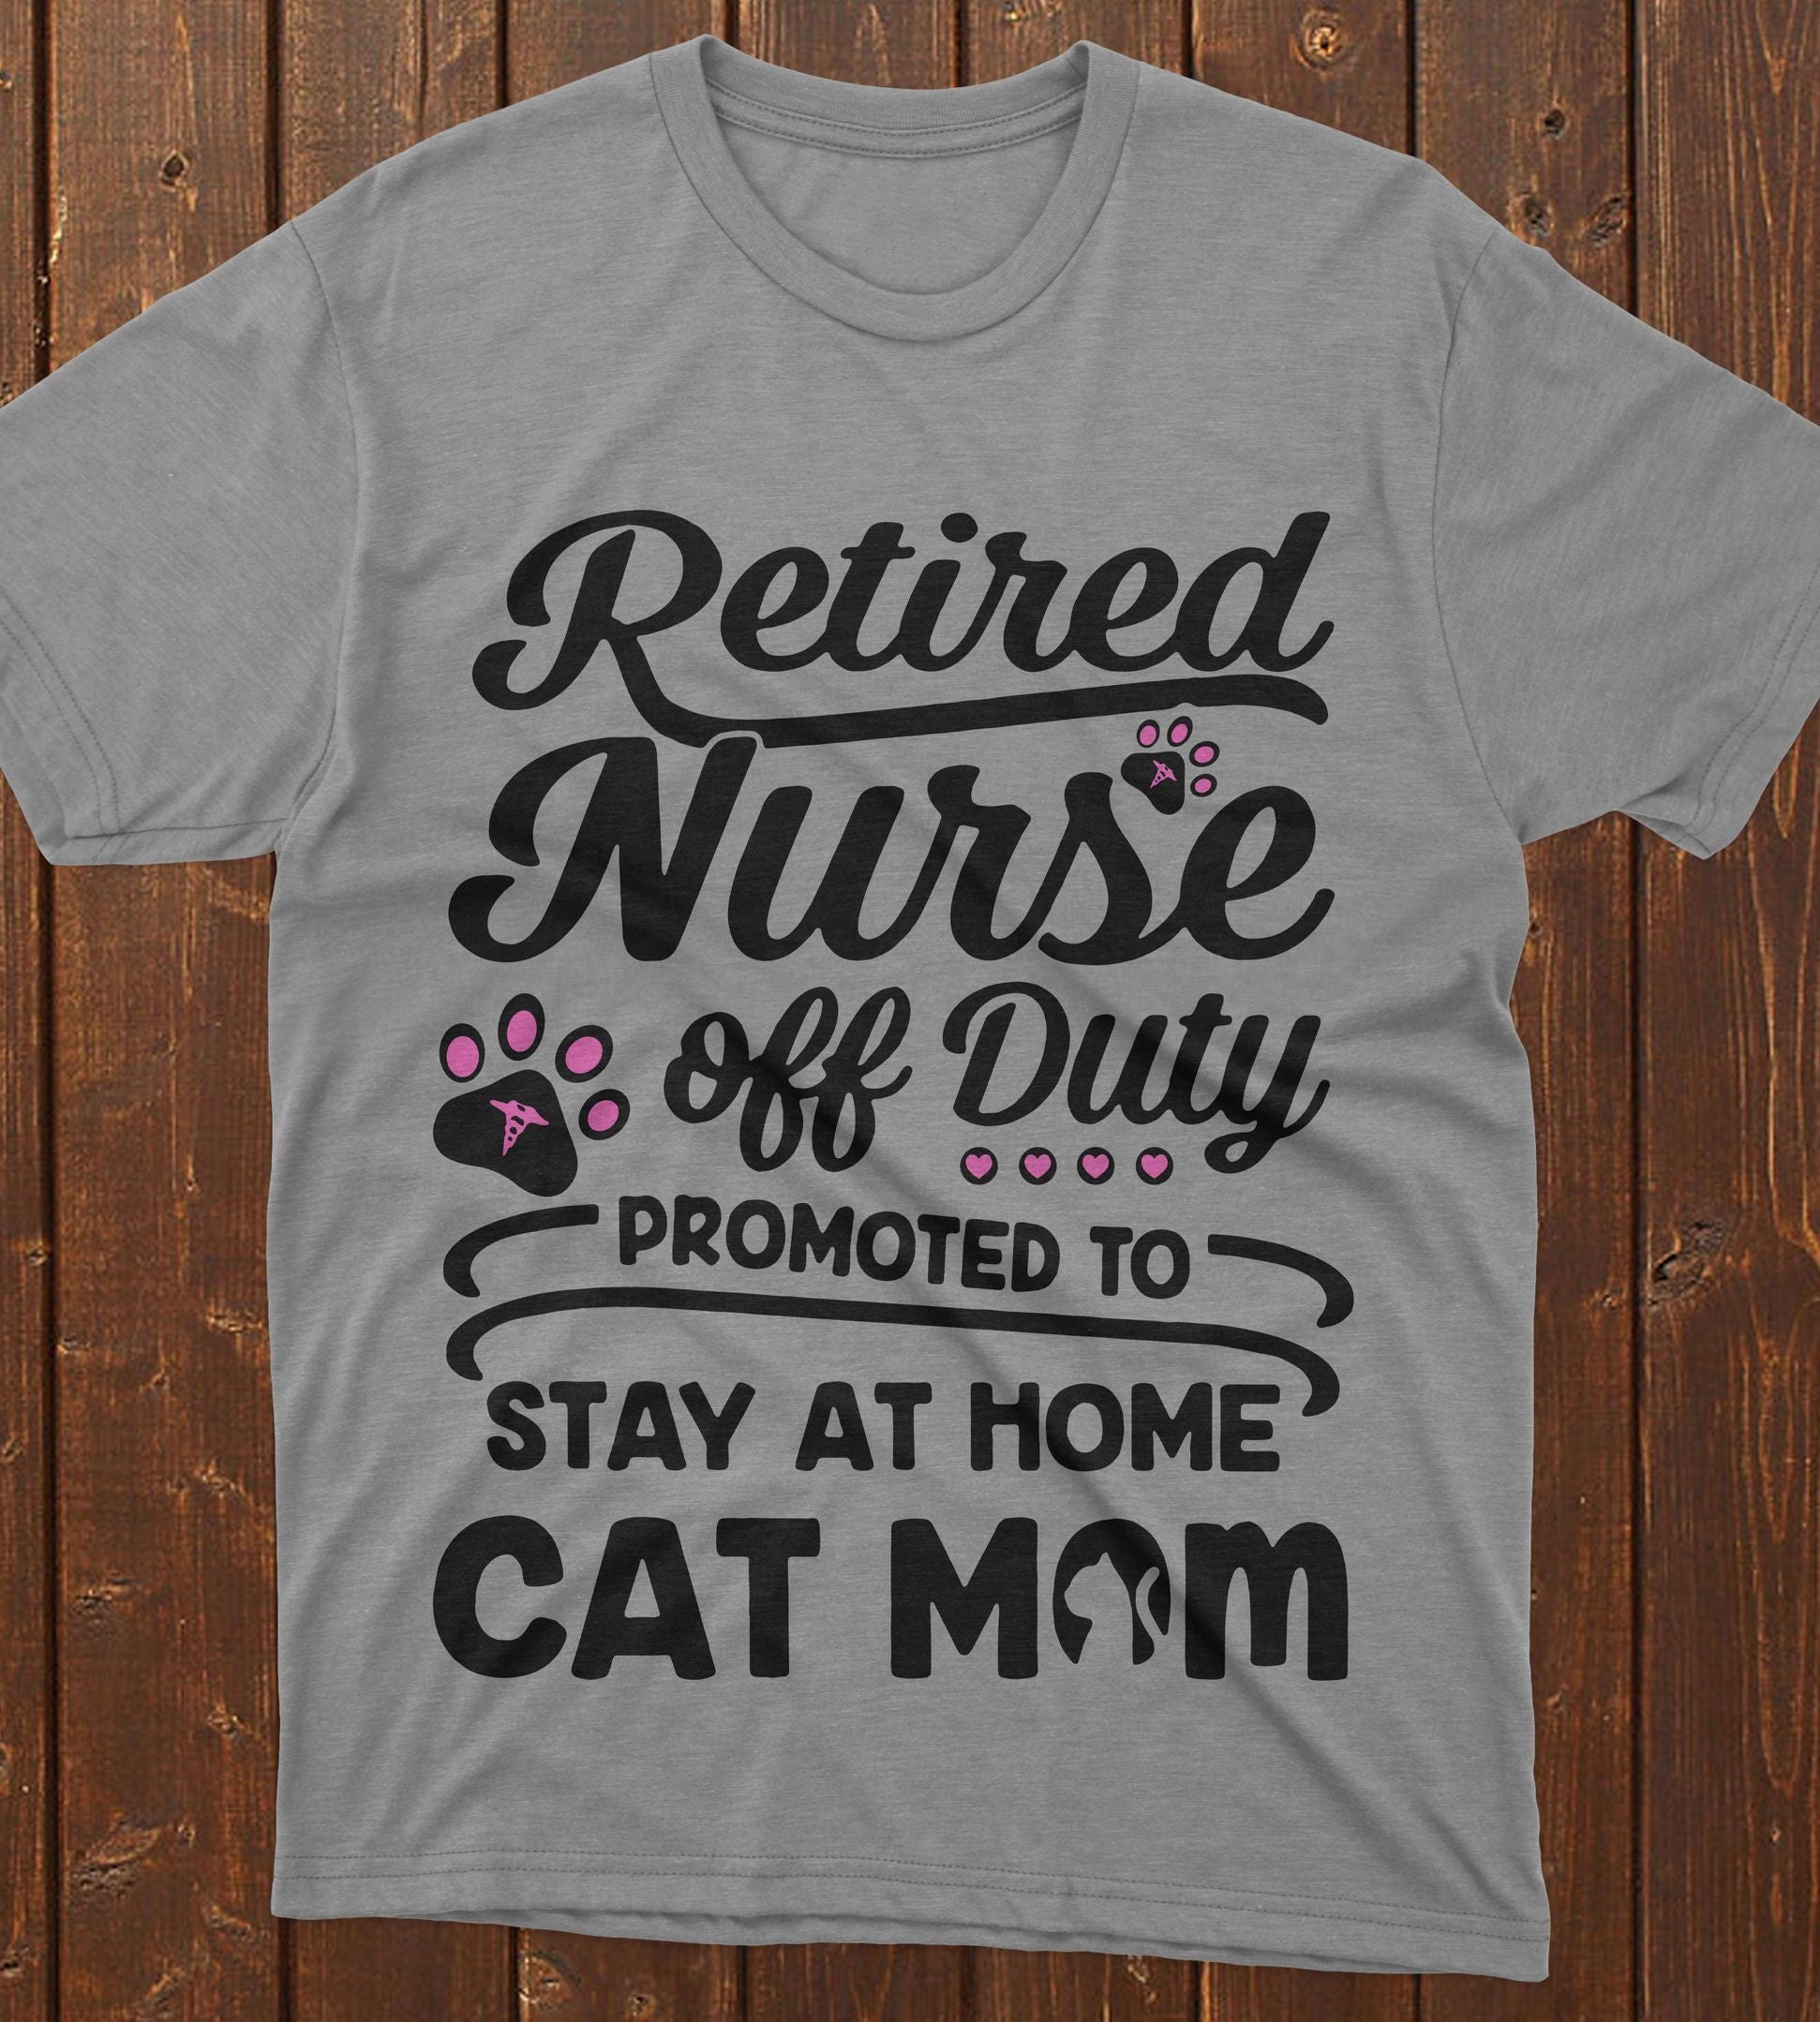 PresentsPrints, Nurse's day retired nurse off duty promoted to stay at home cat mom, Nurse T-Shirt